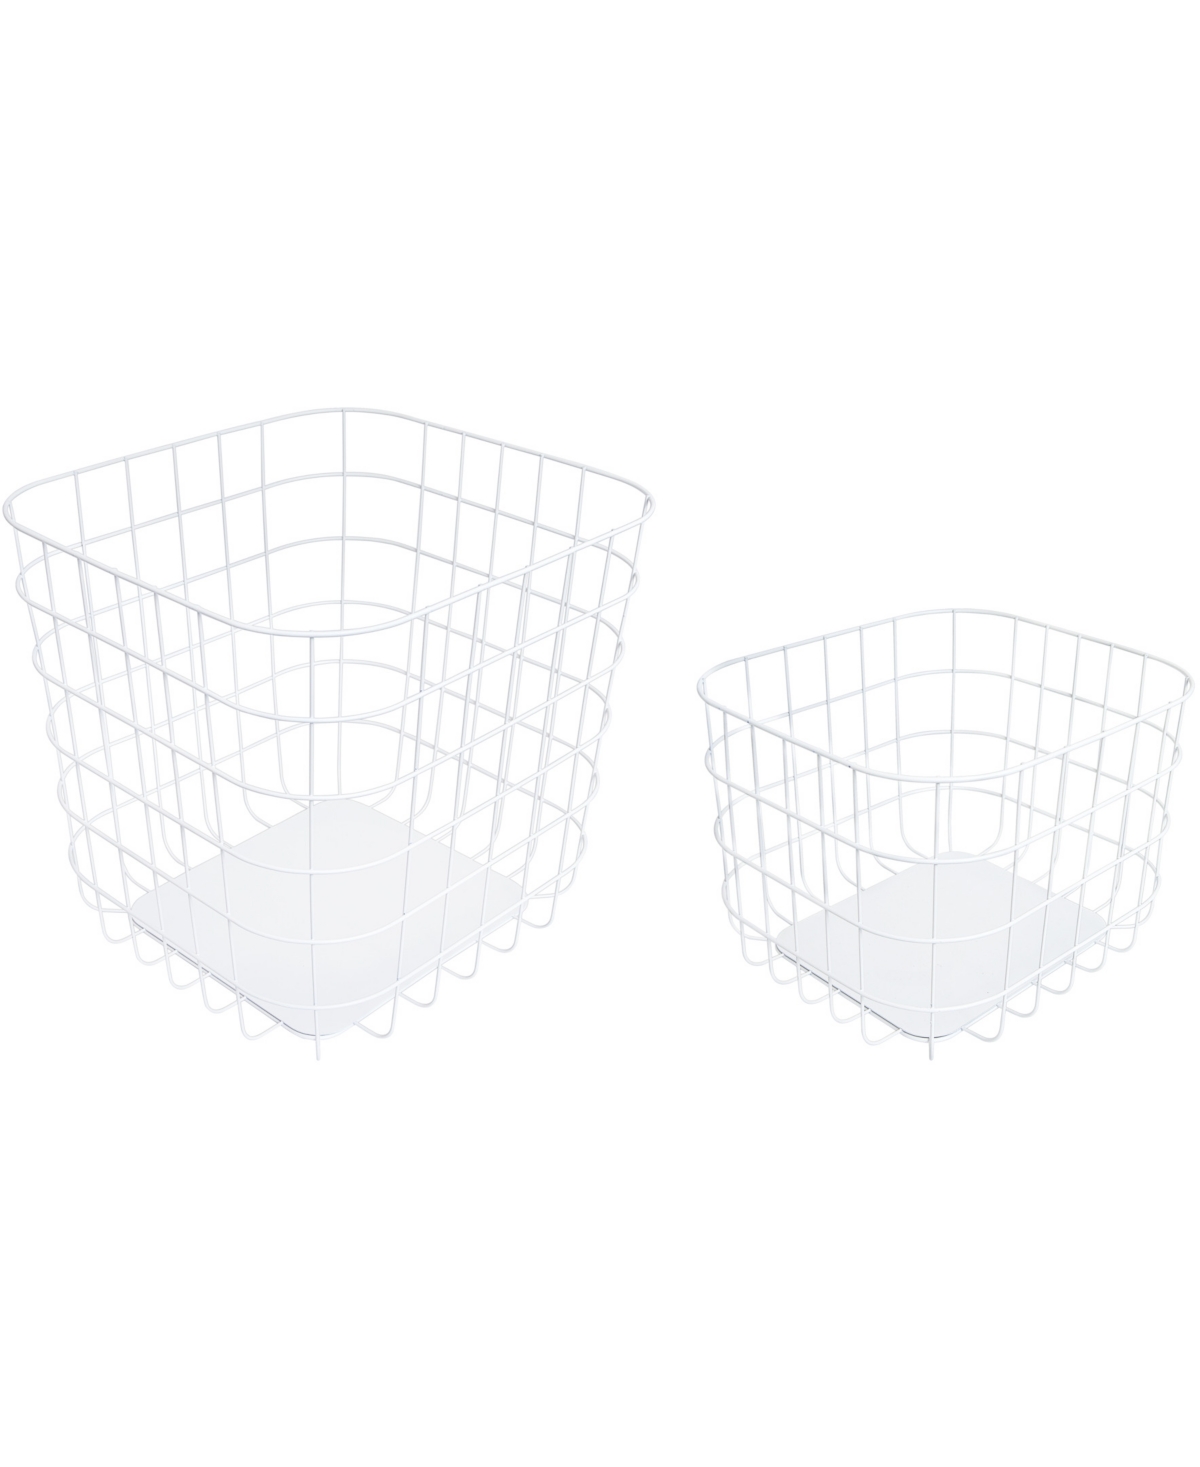 Wethinkstorage Set Of 2 Metal Baskets With Iron Board, 14.5-liter And 32-liter In White